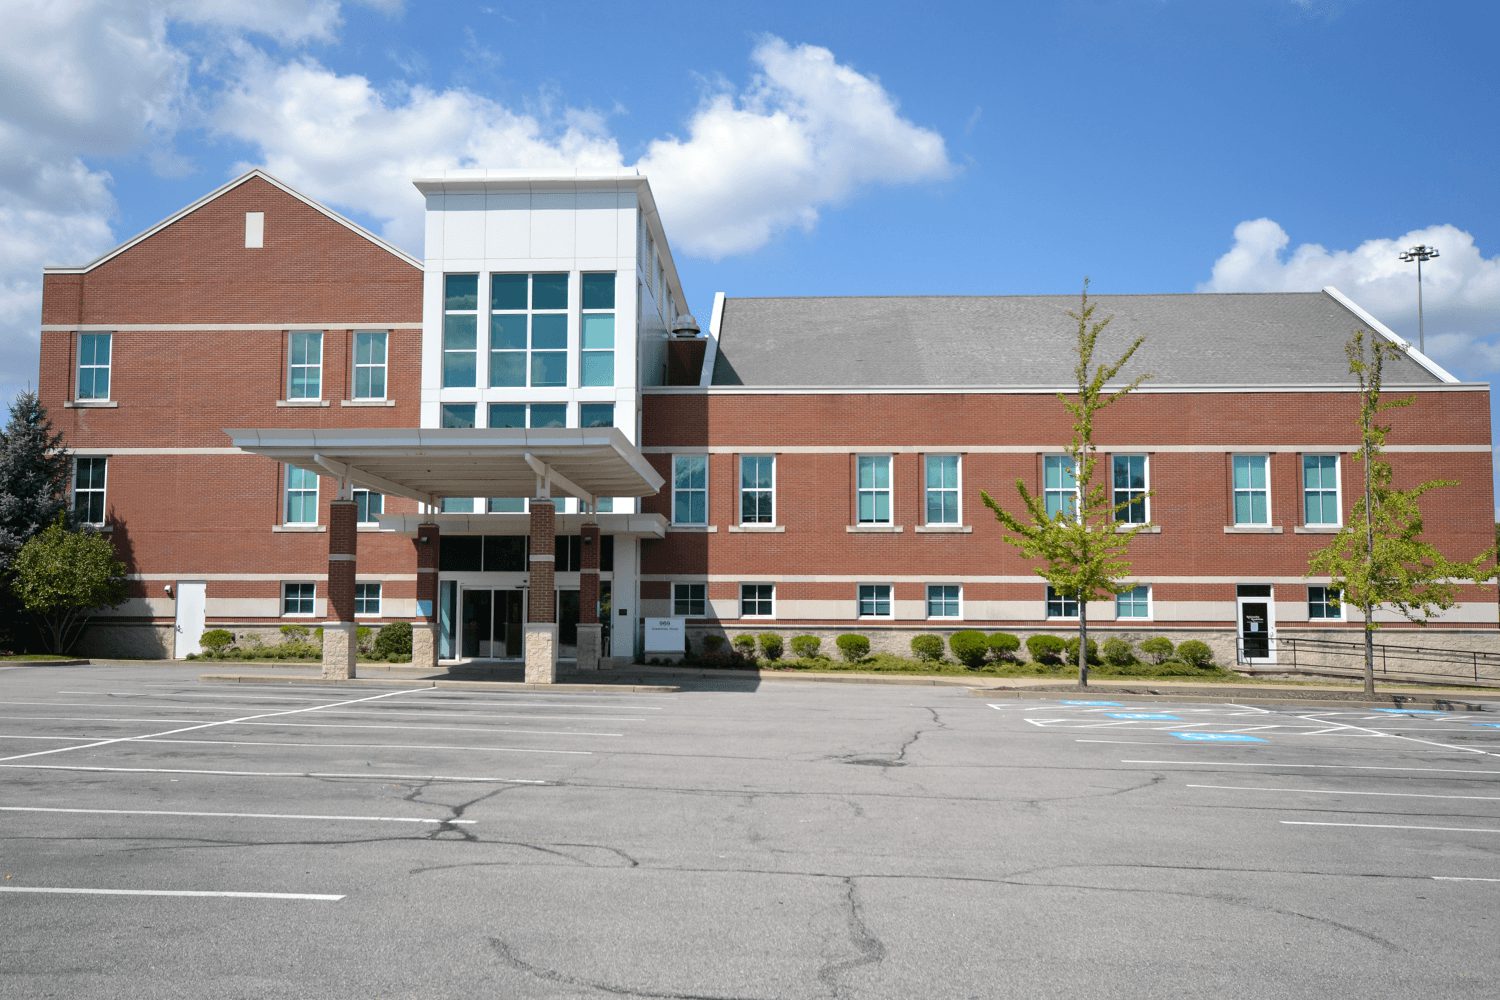 Exterior of the medical care facility, with a large parking lot